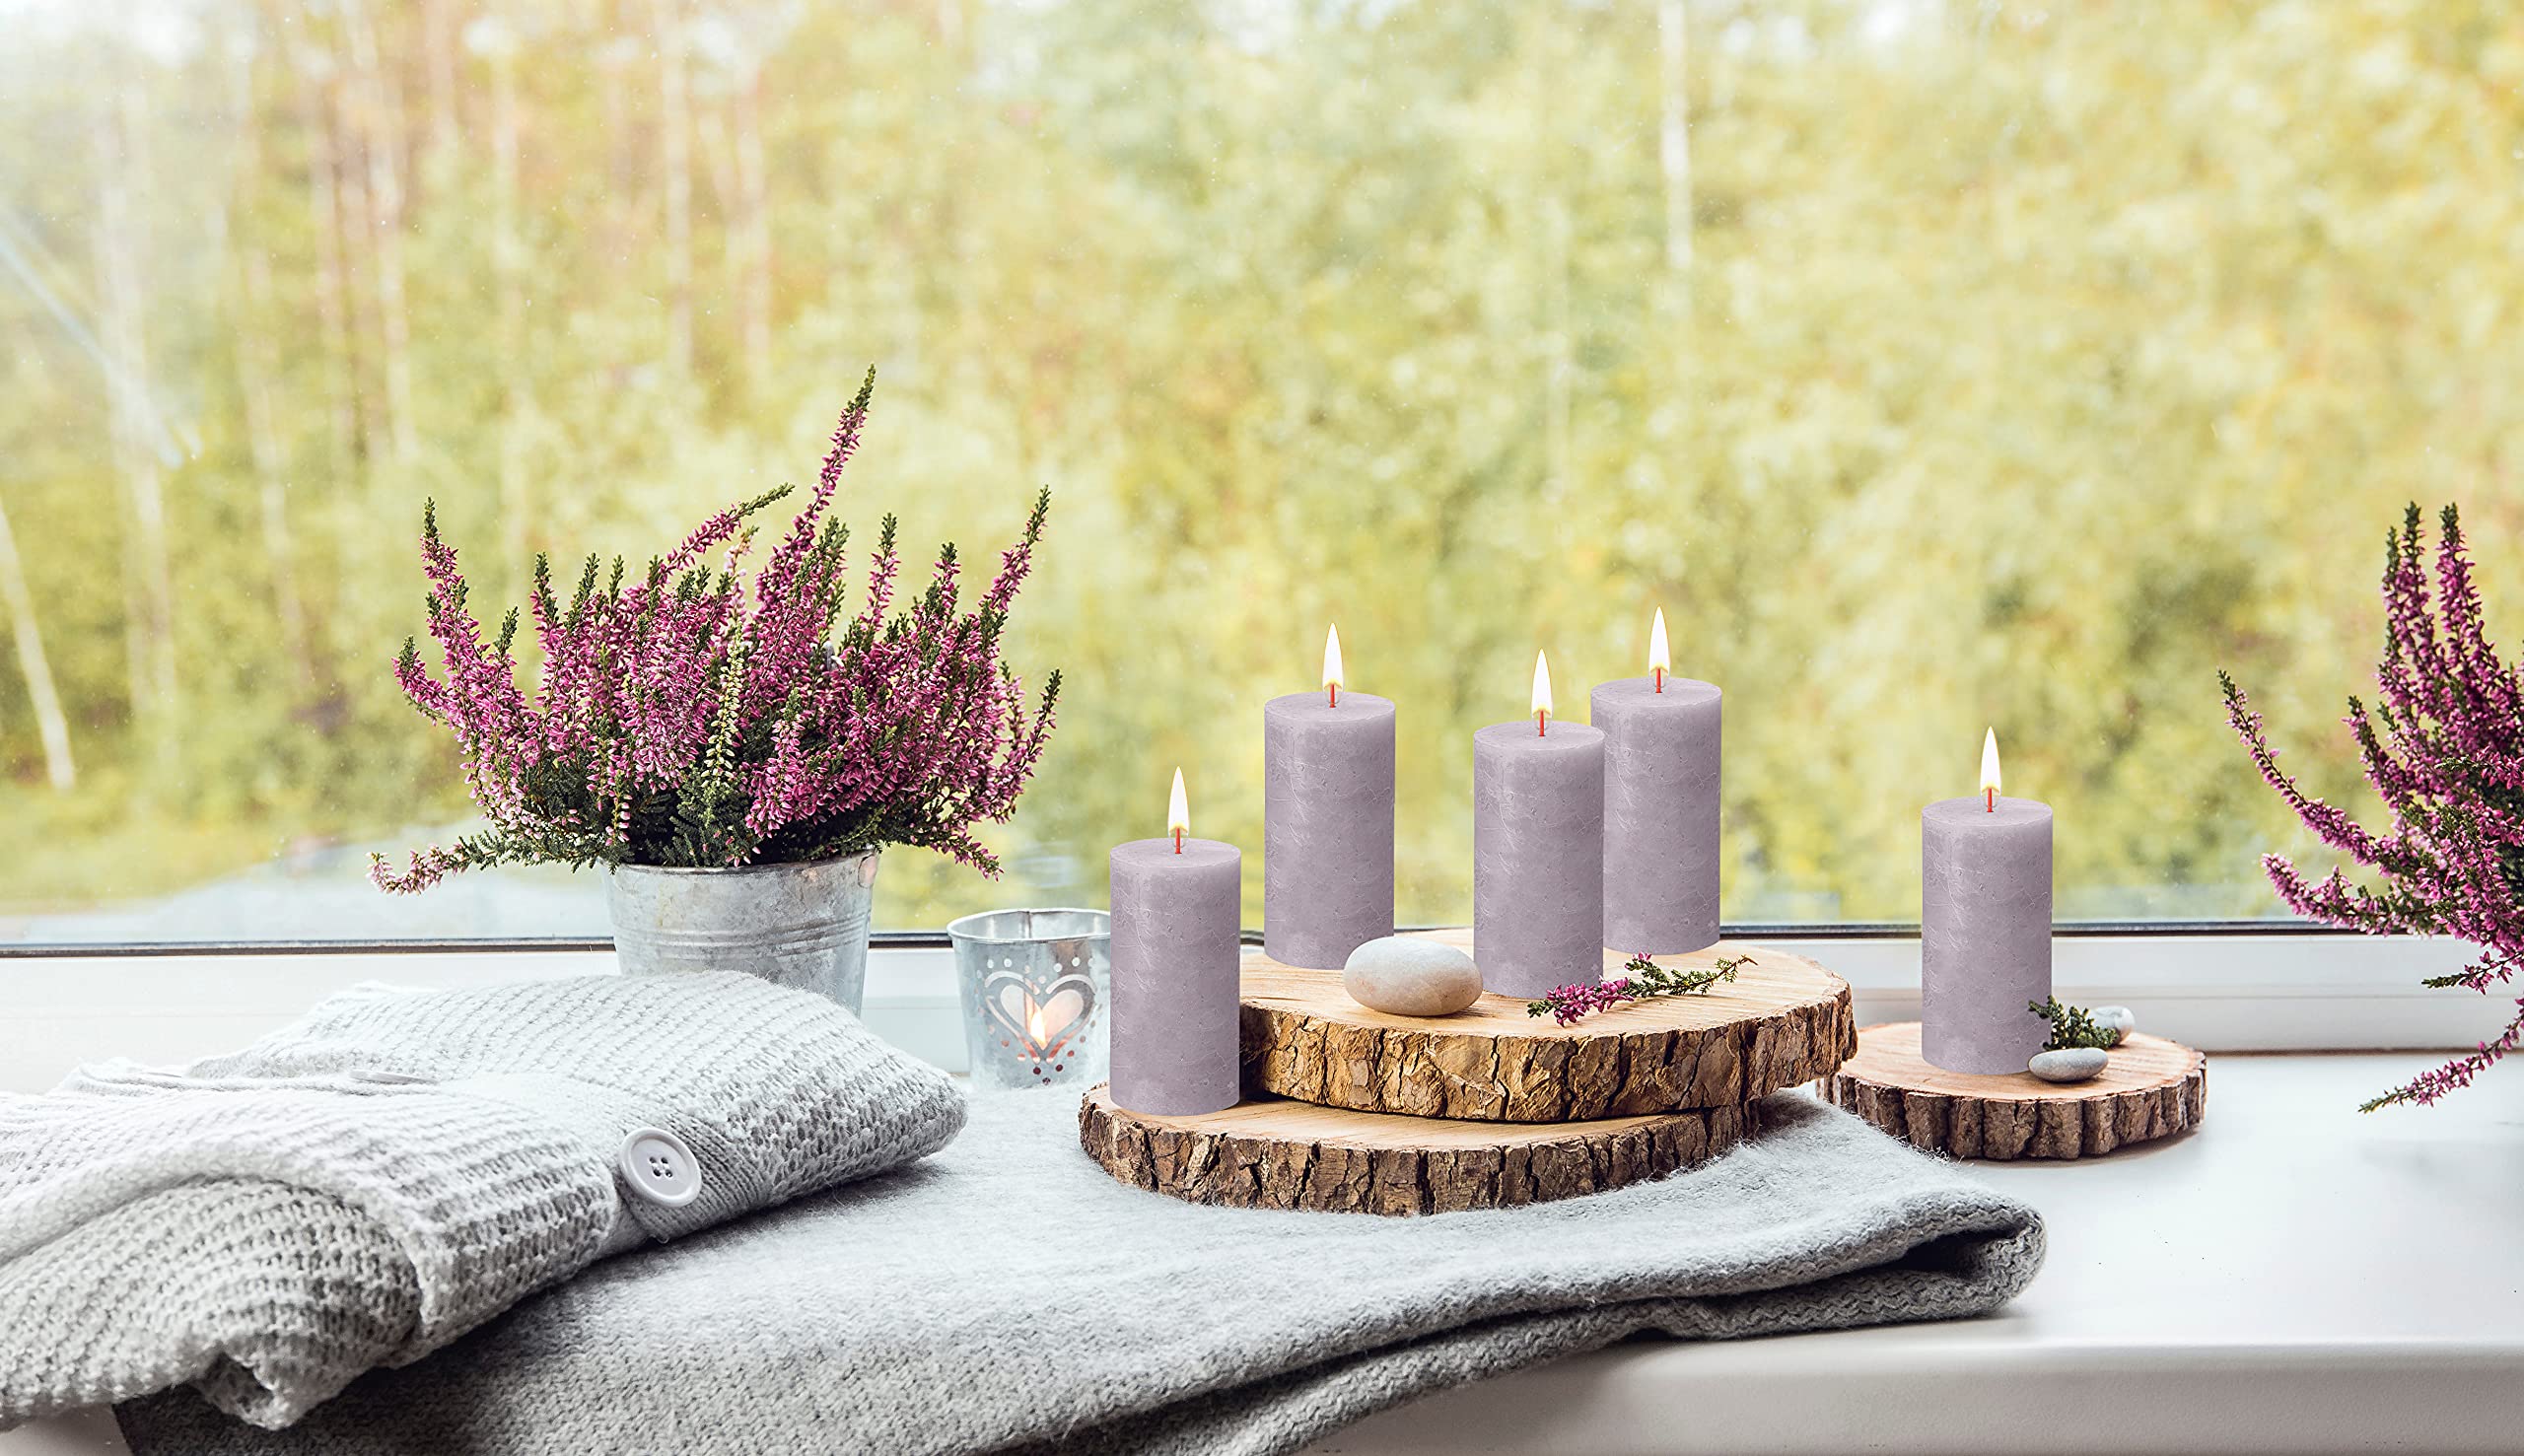 BOLSIUS 4 Pack Frosted Lavender Rustic Pillar Candles - 2 X 4 Inches - Premium European Quality - Includes Natural Plant-Based Wax - Unscented Dripless Smokeless 30 Hour Party and Wedding Candles  - Very Good